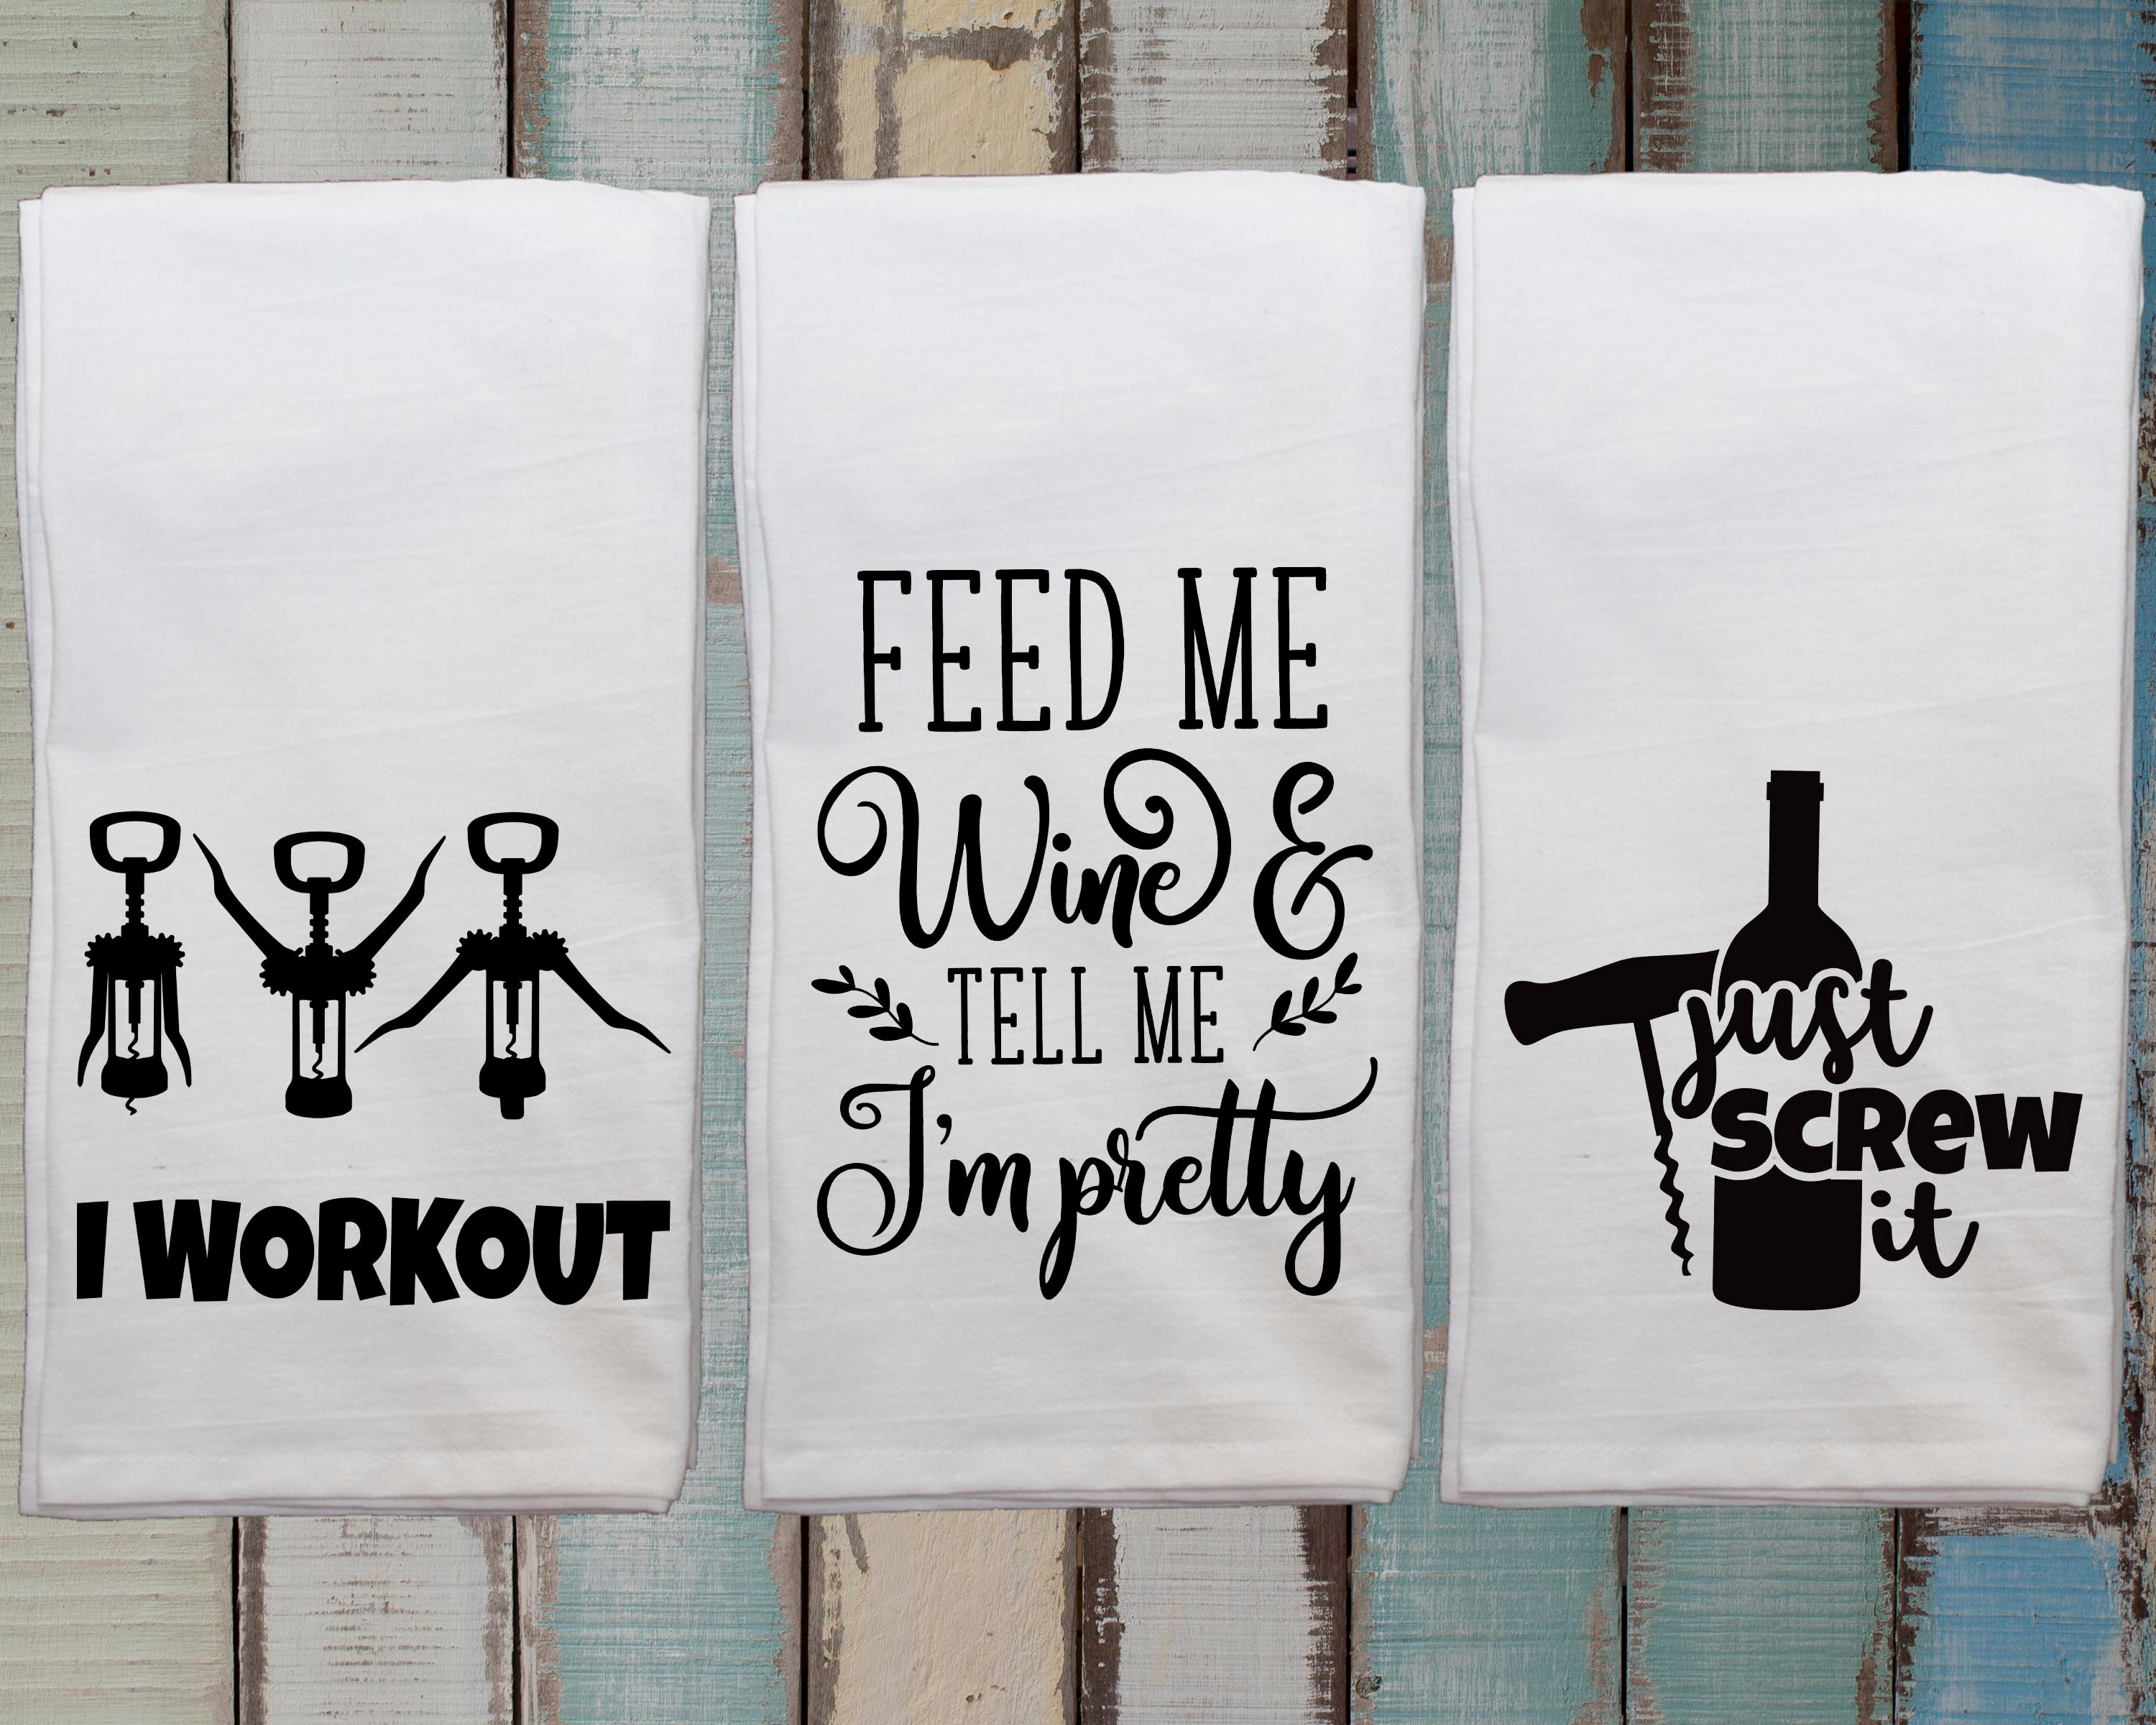 Fancy Kitchen Towels– Simply Very Nice